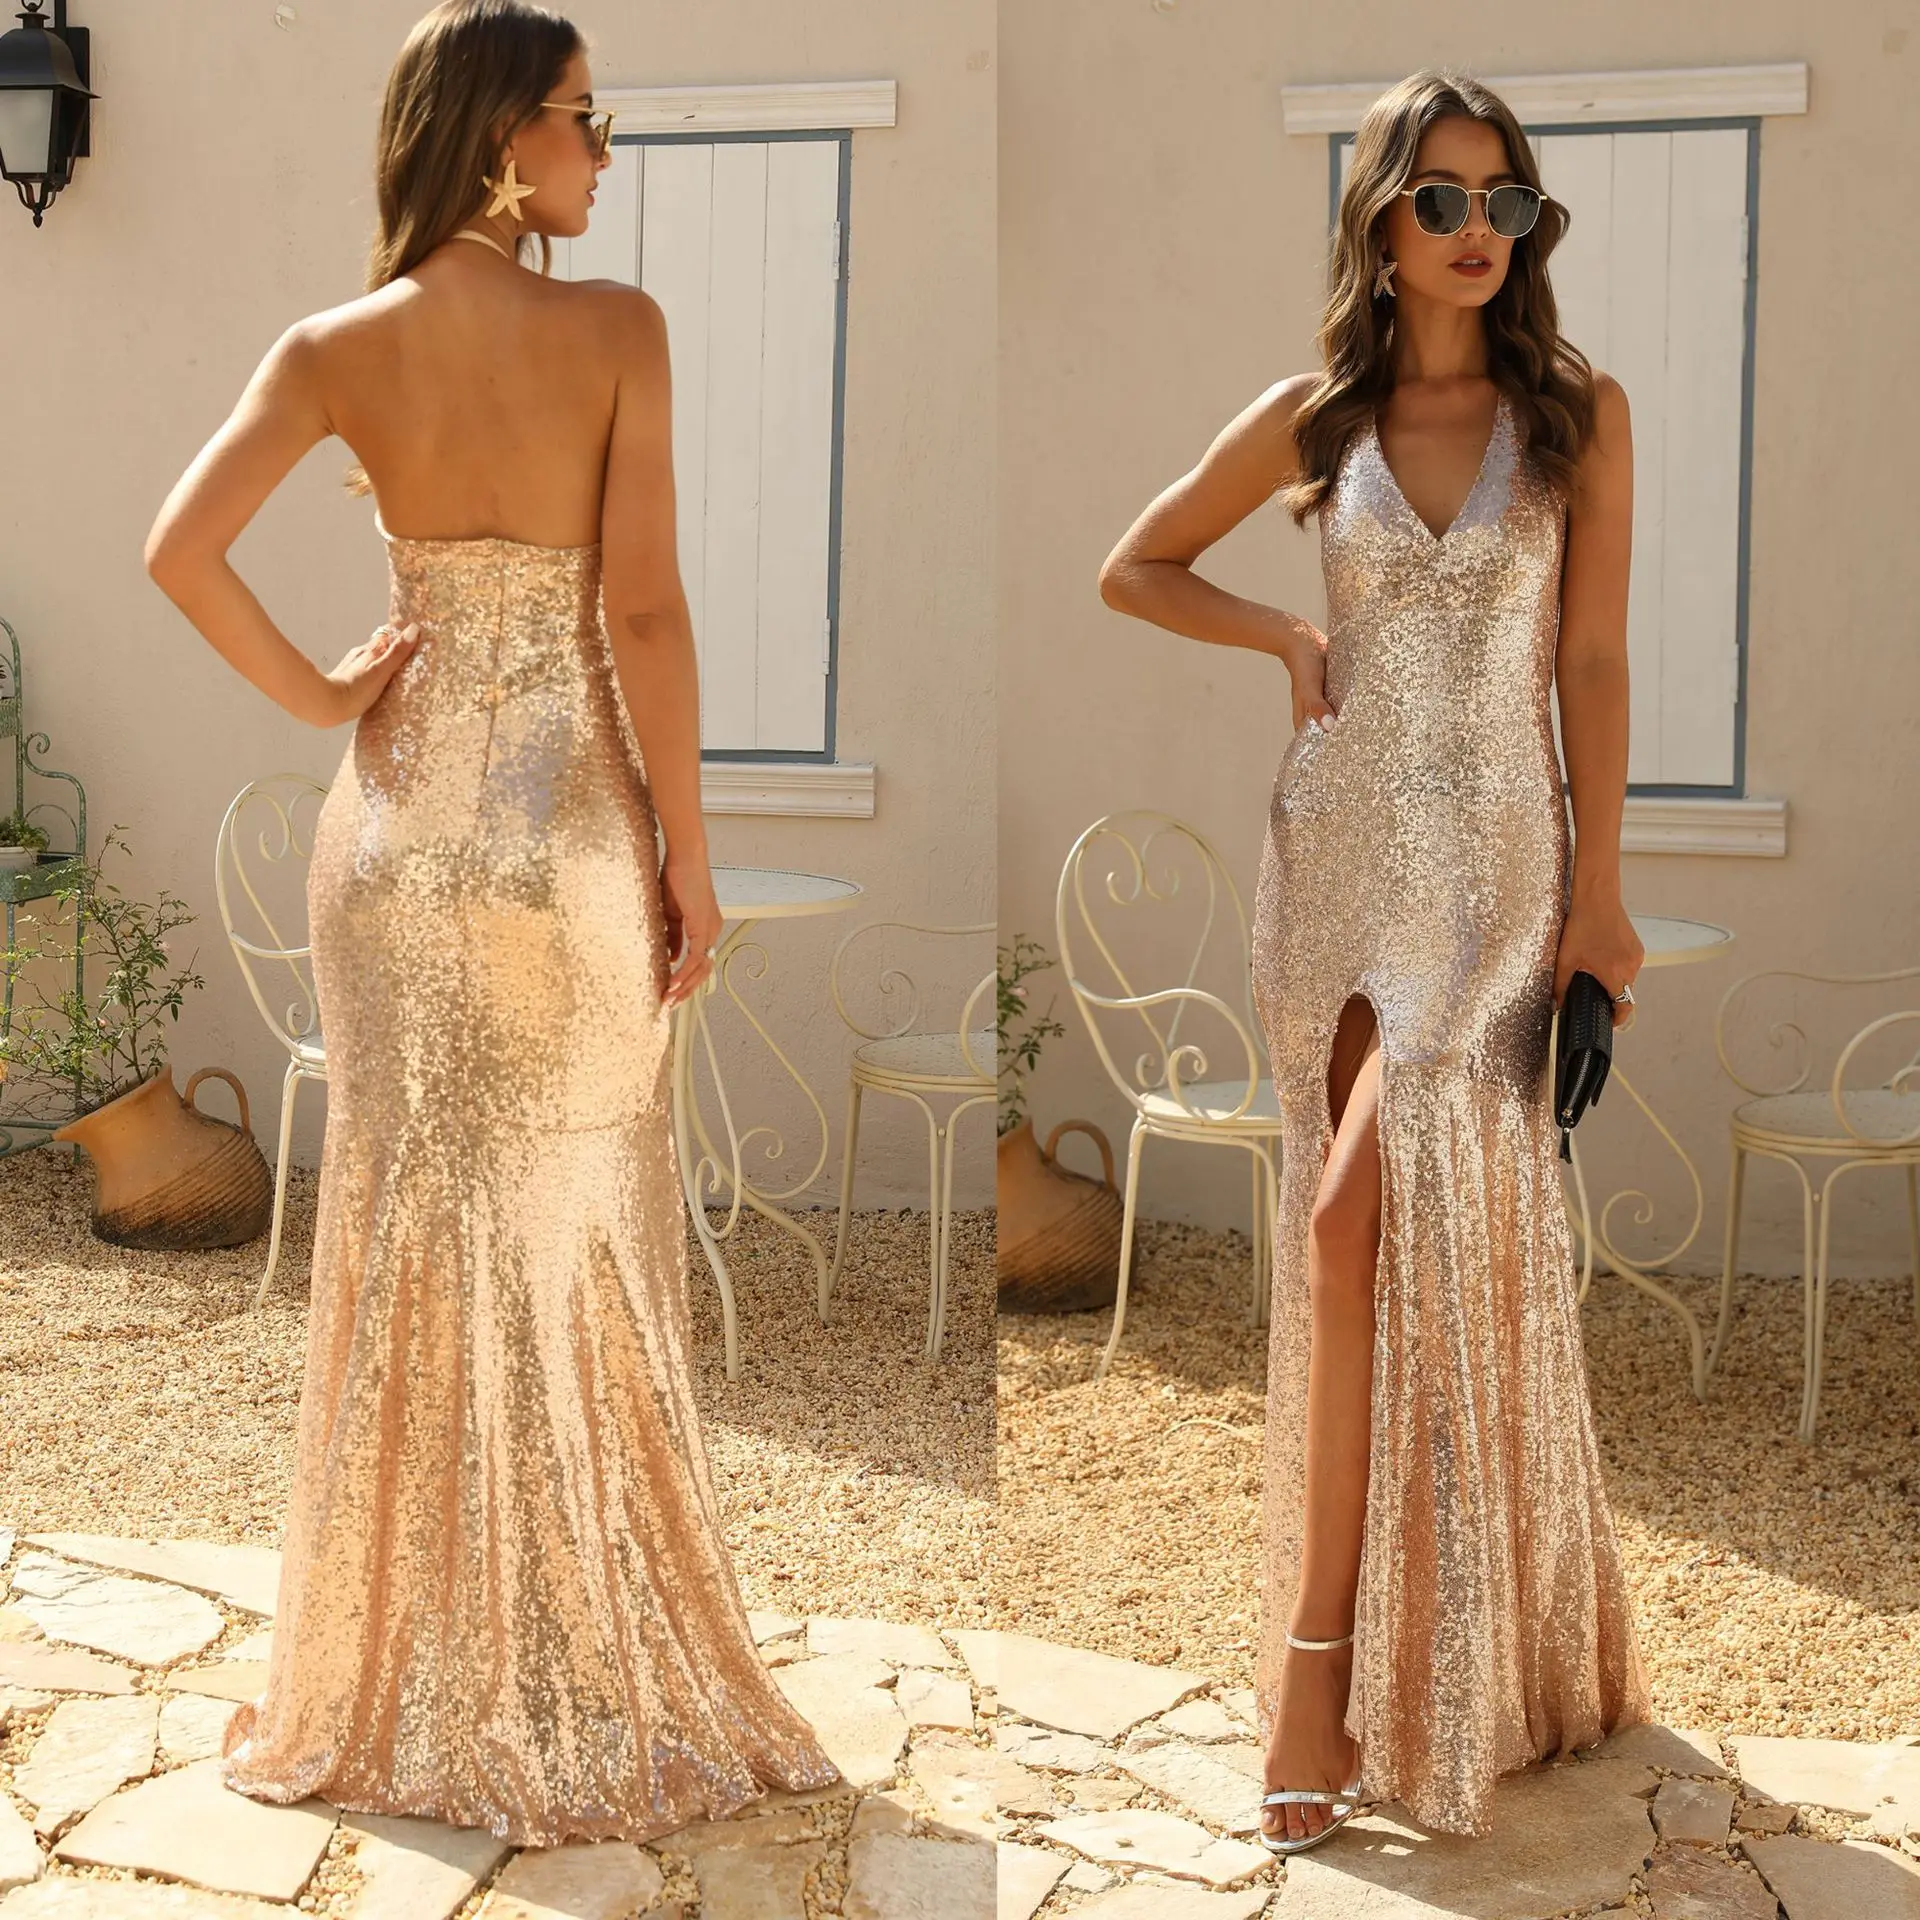 

B51682A New style lady sexy v neck backless fashion high slit sequined dress, Show